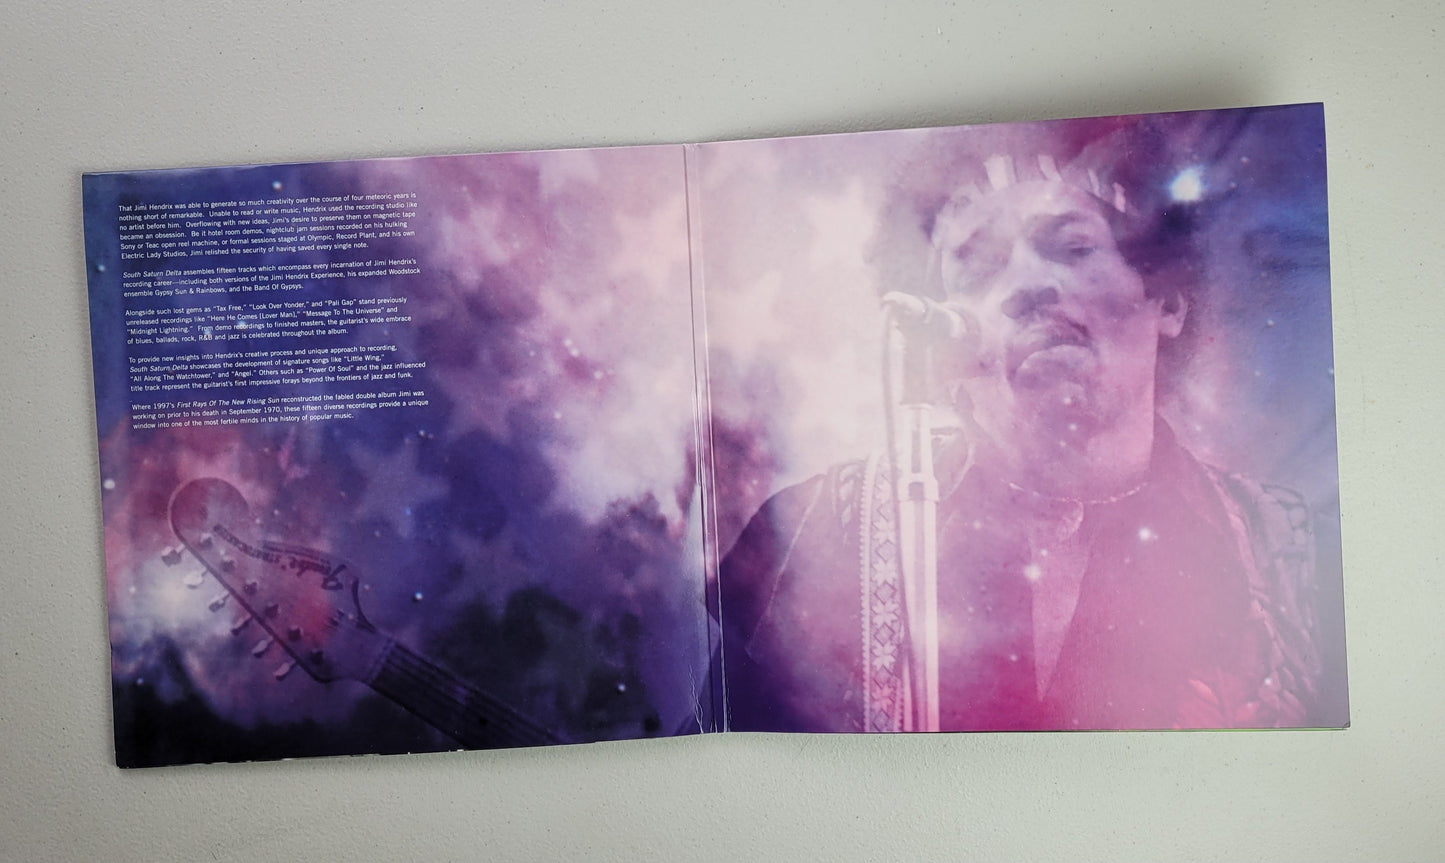 Jimi Hendrix,South Saturn Delta,180g 8 page glossy picture booklet,LP Album